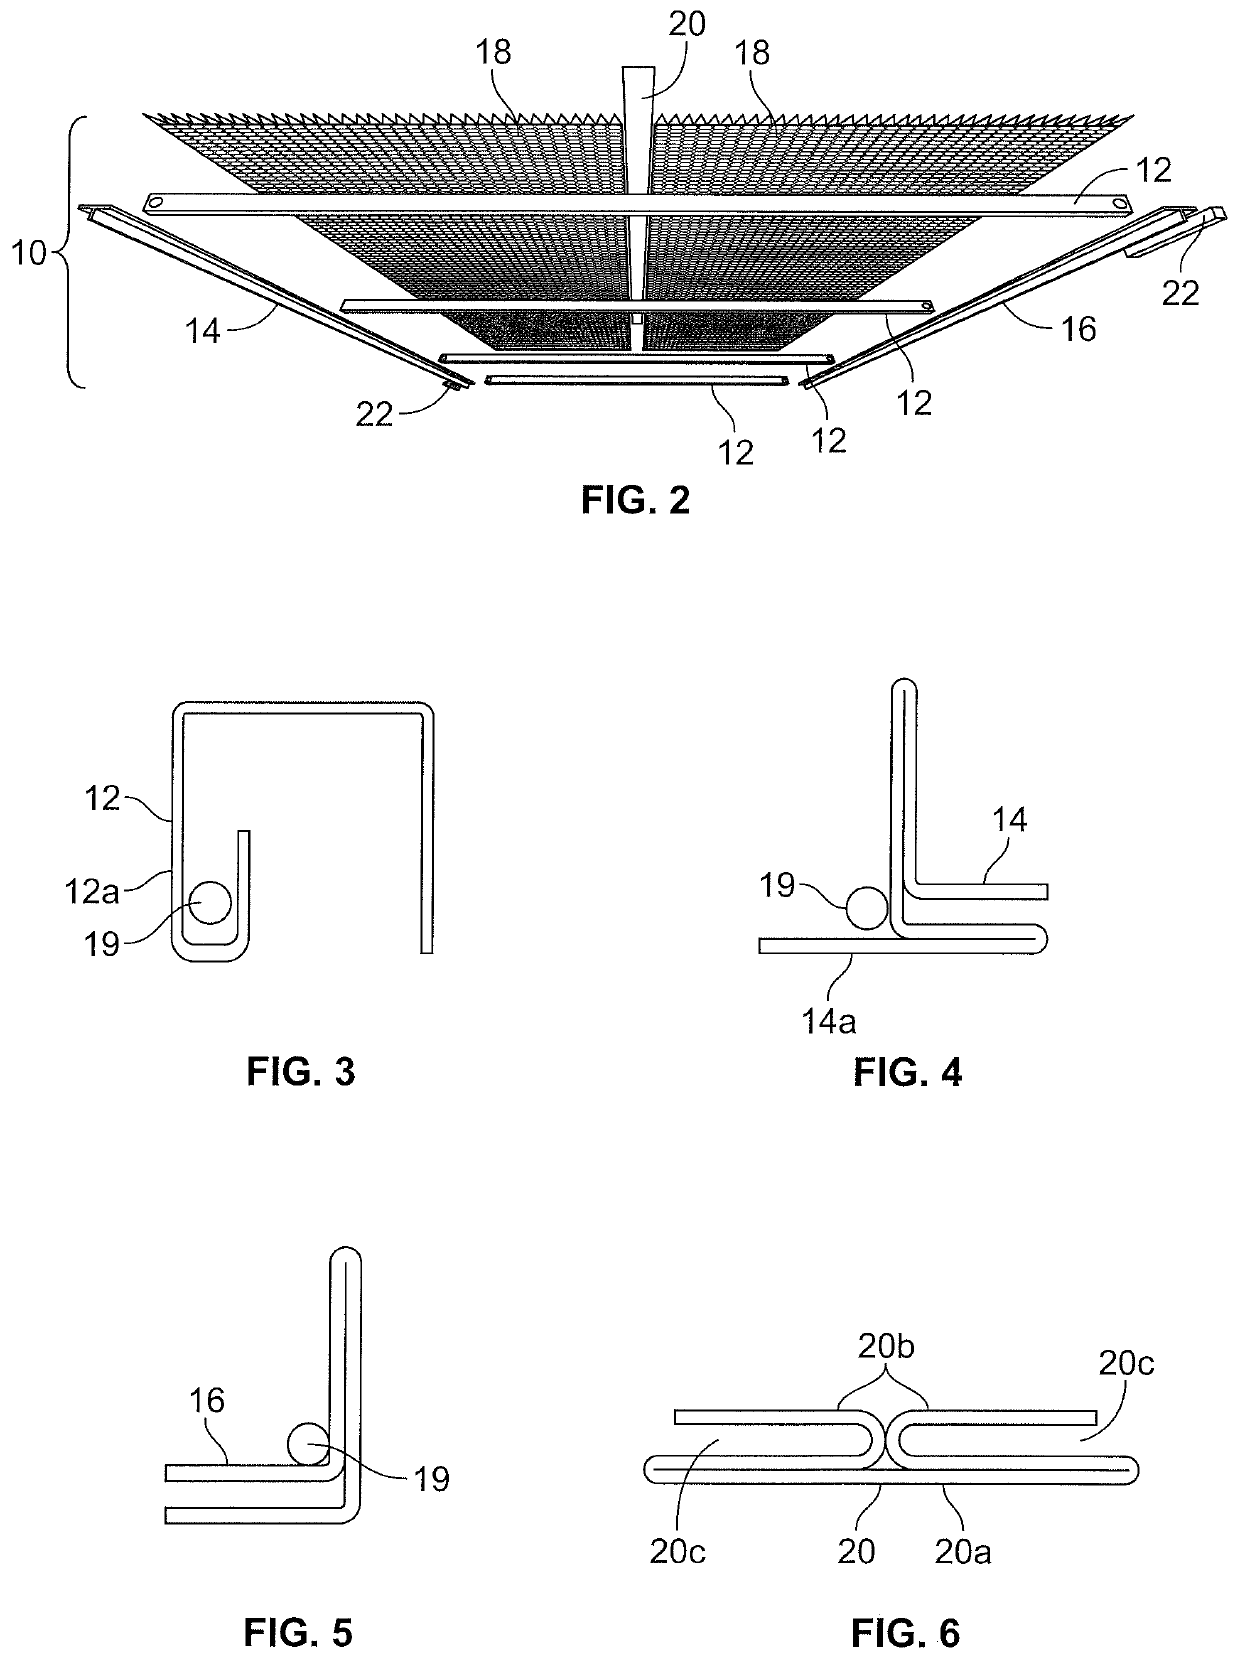 Enhanced security fence and method of construction and installation